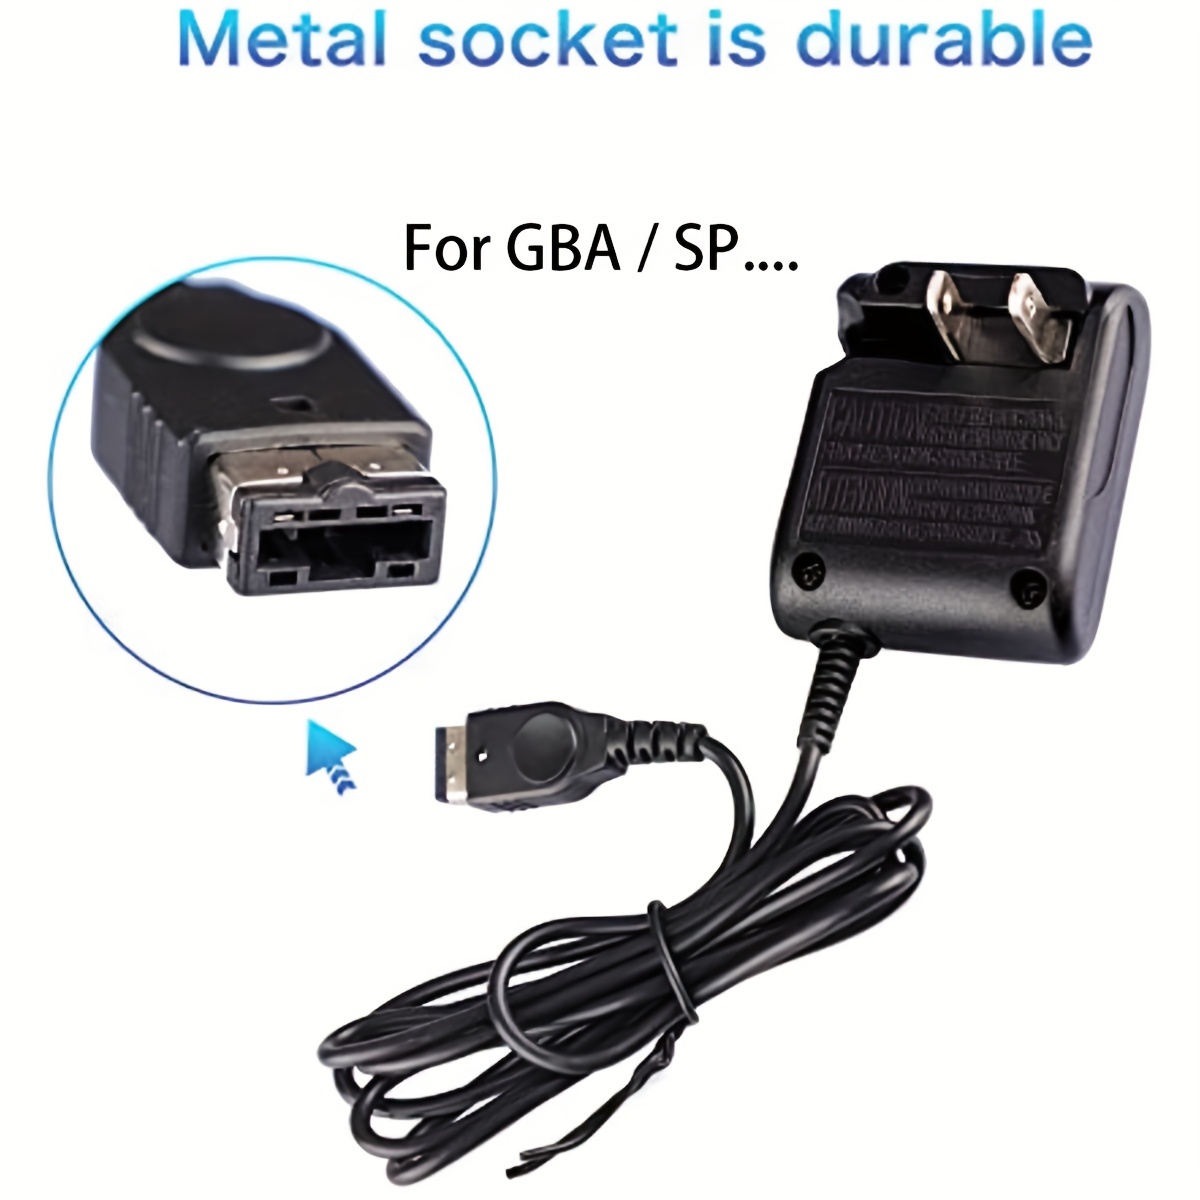  Gameboy Advance SP Charger, AC Adapter for Nintendo NDS and Game  Boy Advance SP Power Charger, Wall Travel Charger Power Cord 5.2V 450mA for  Nintendo DS Gameboy Advance Charger : Video